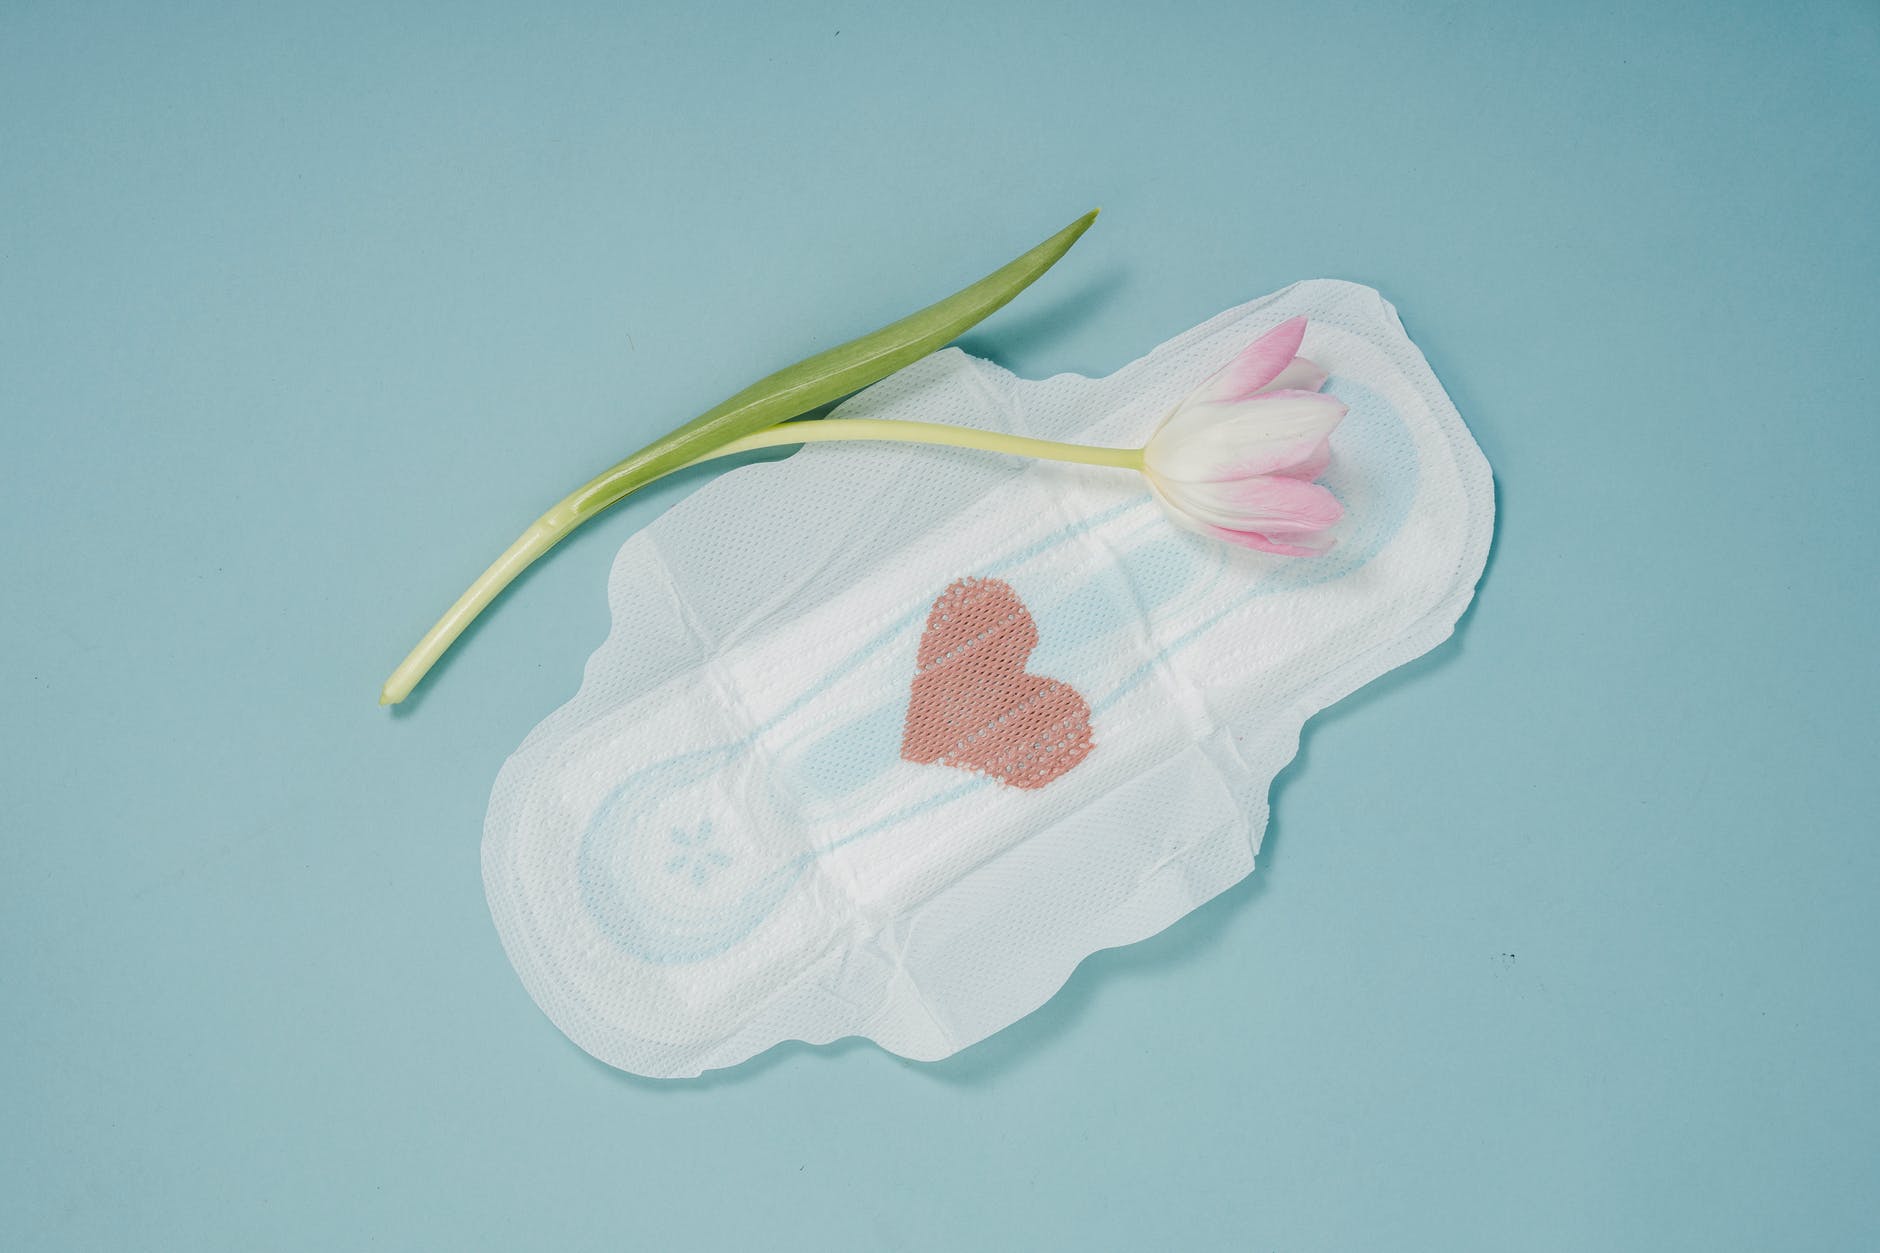 Period Hygiene that Every Girl Should Maintain